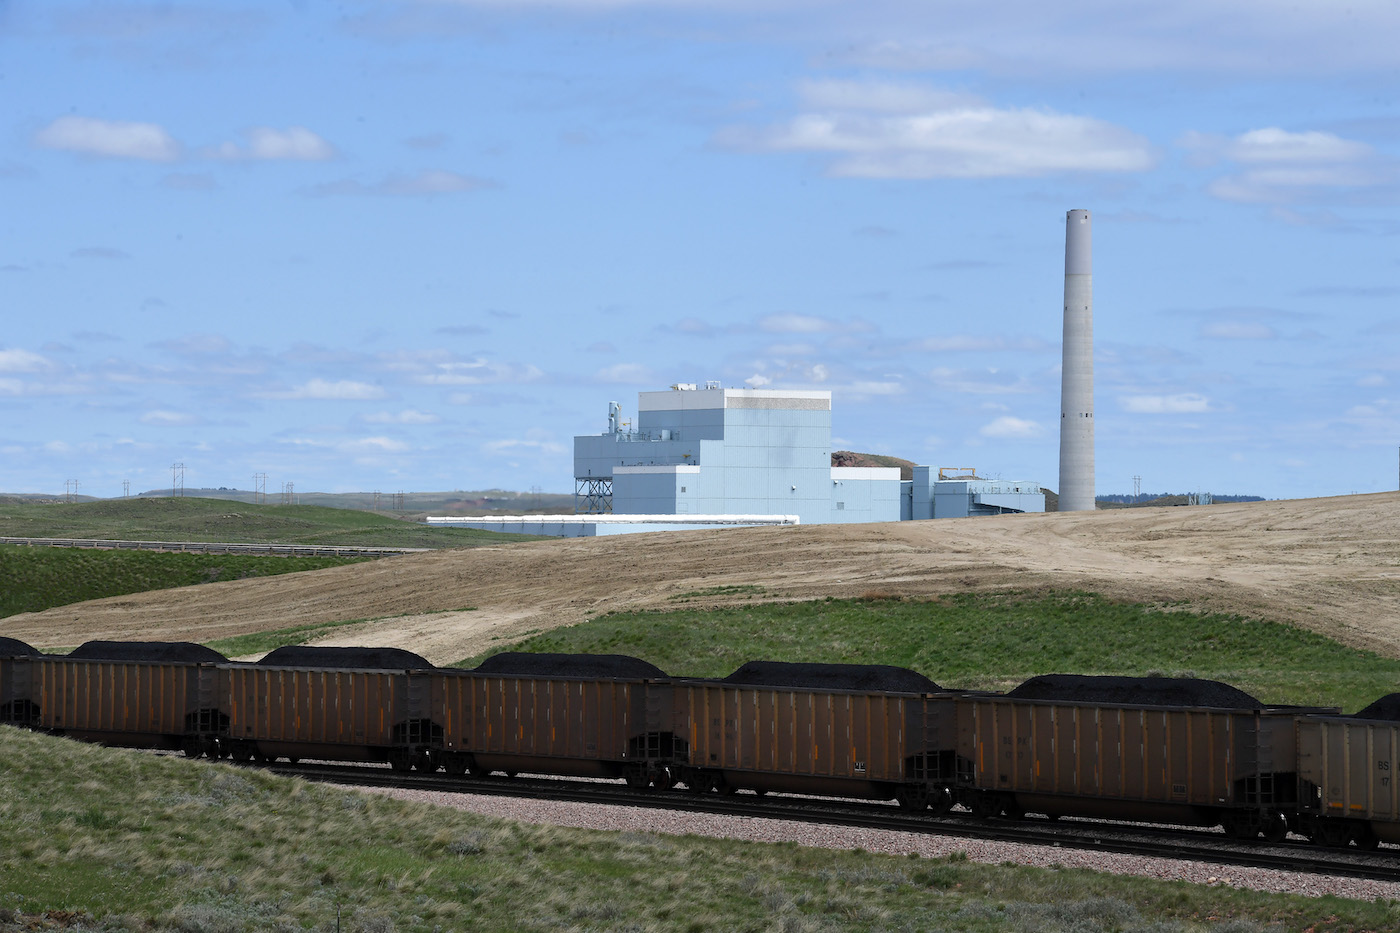 A coal plant in the distance with a train full of coal going by in the foreground